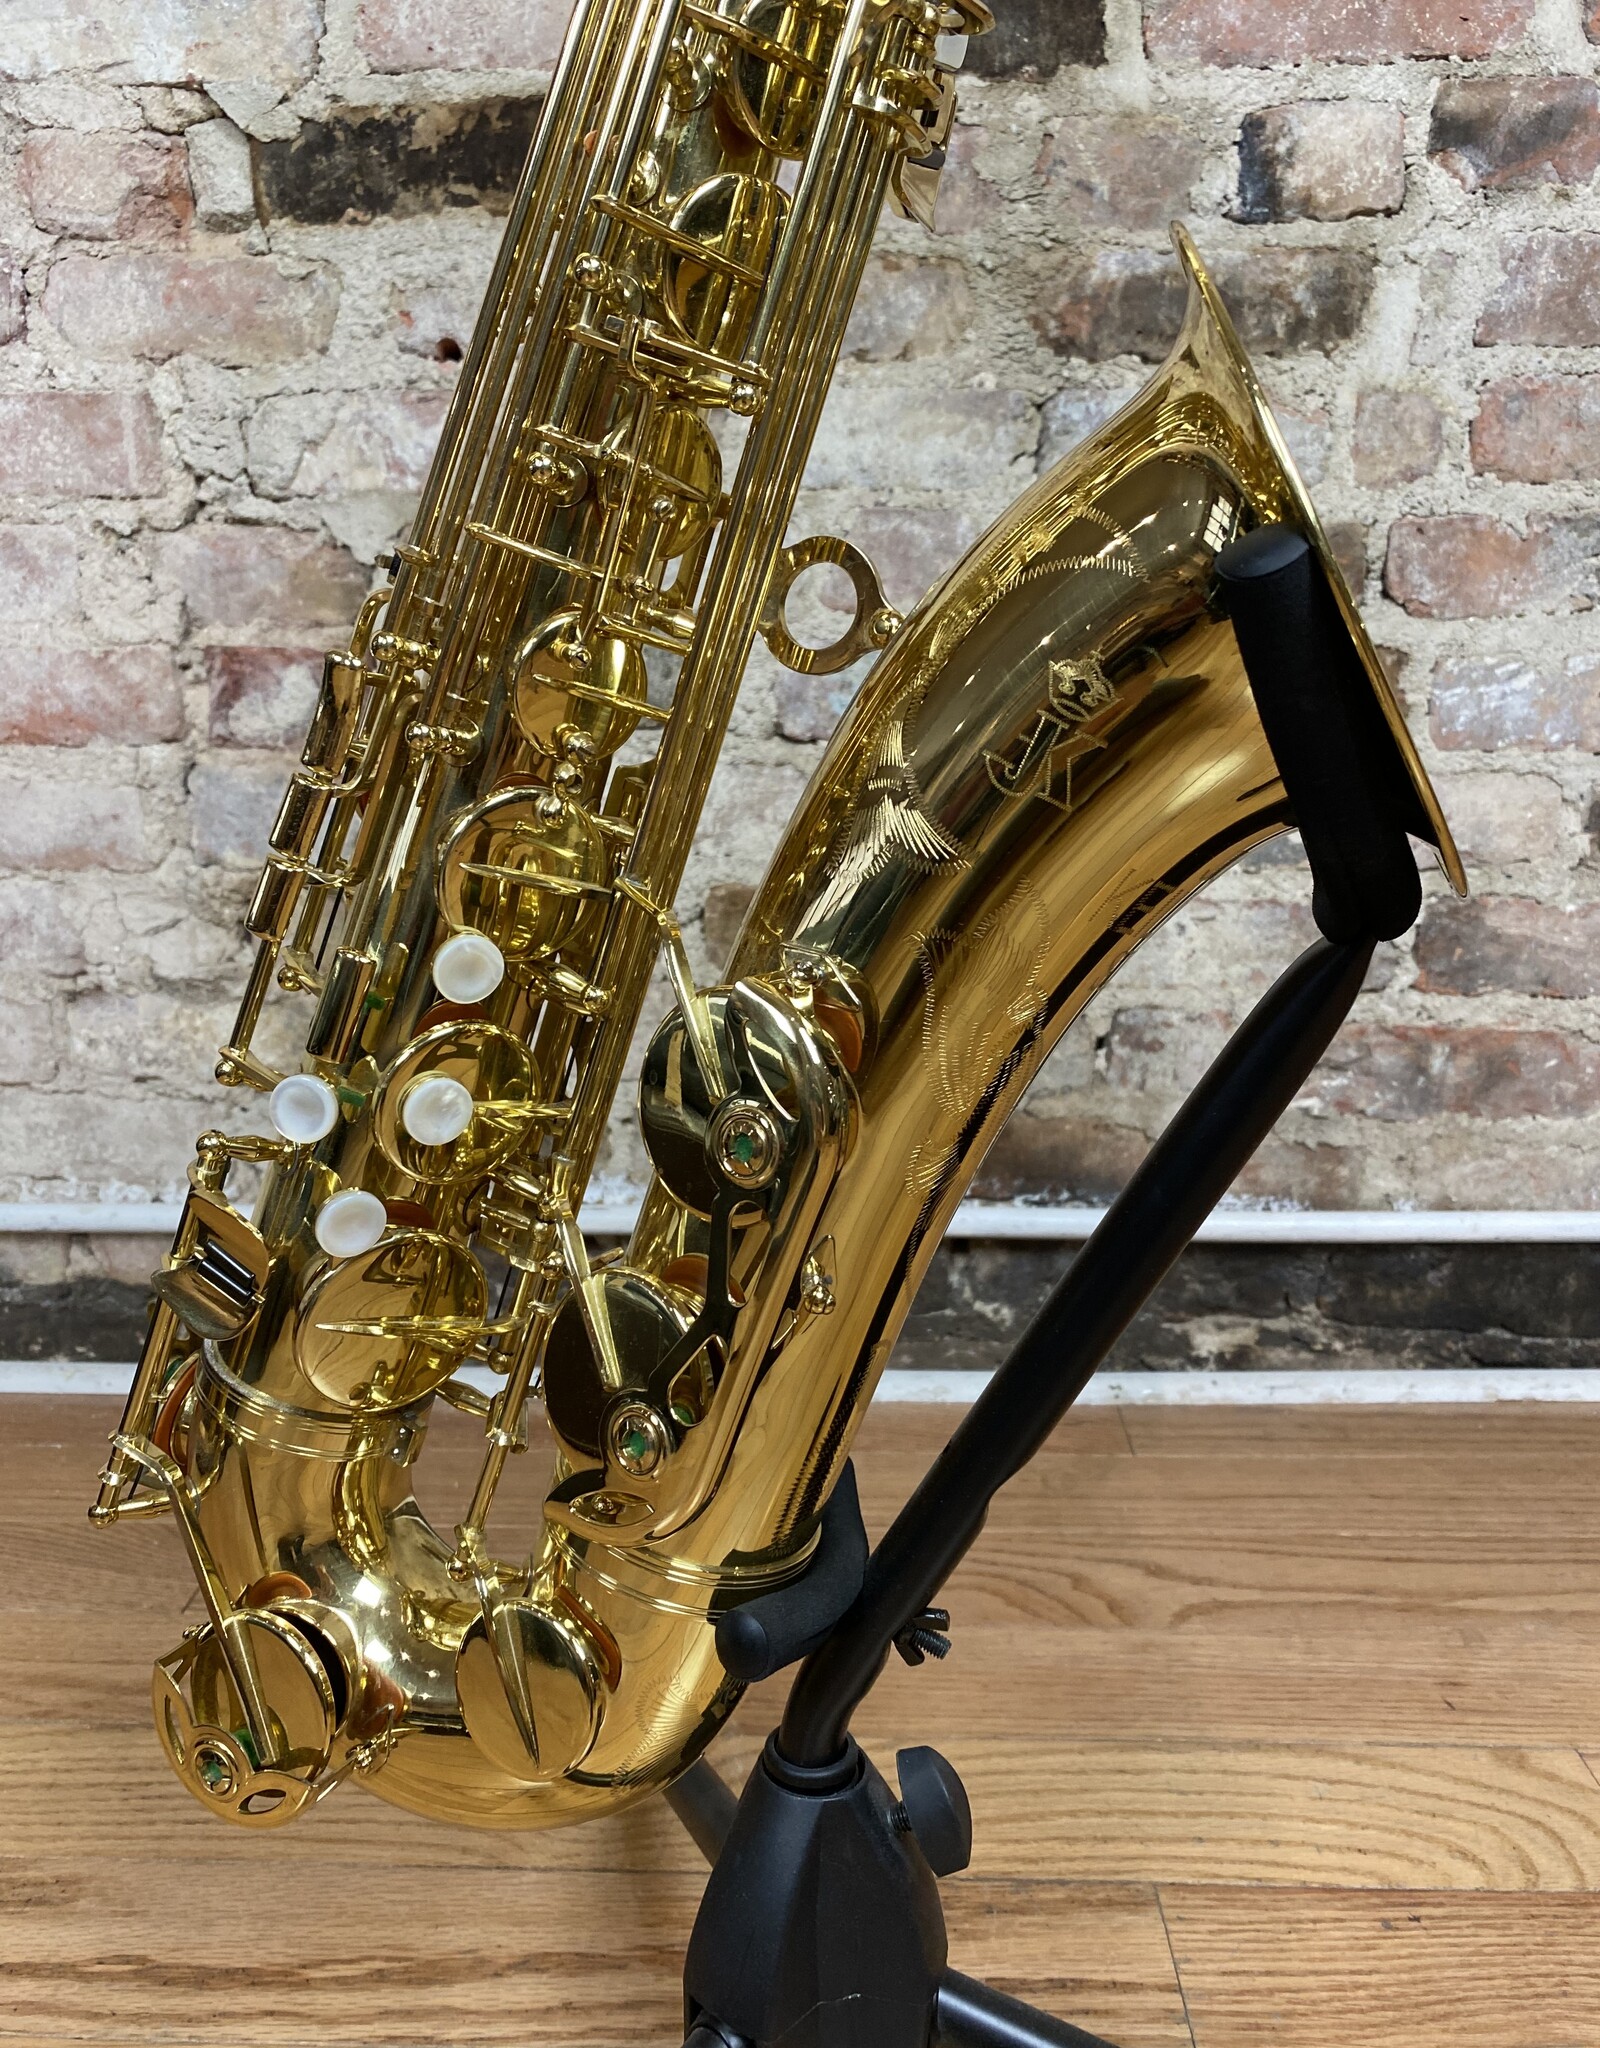 Keilwerth Keilwerth SX90R Tenor Saxophone in Incredible Condition Gold  Lacquered!